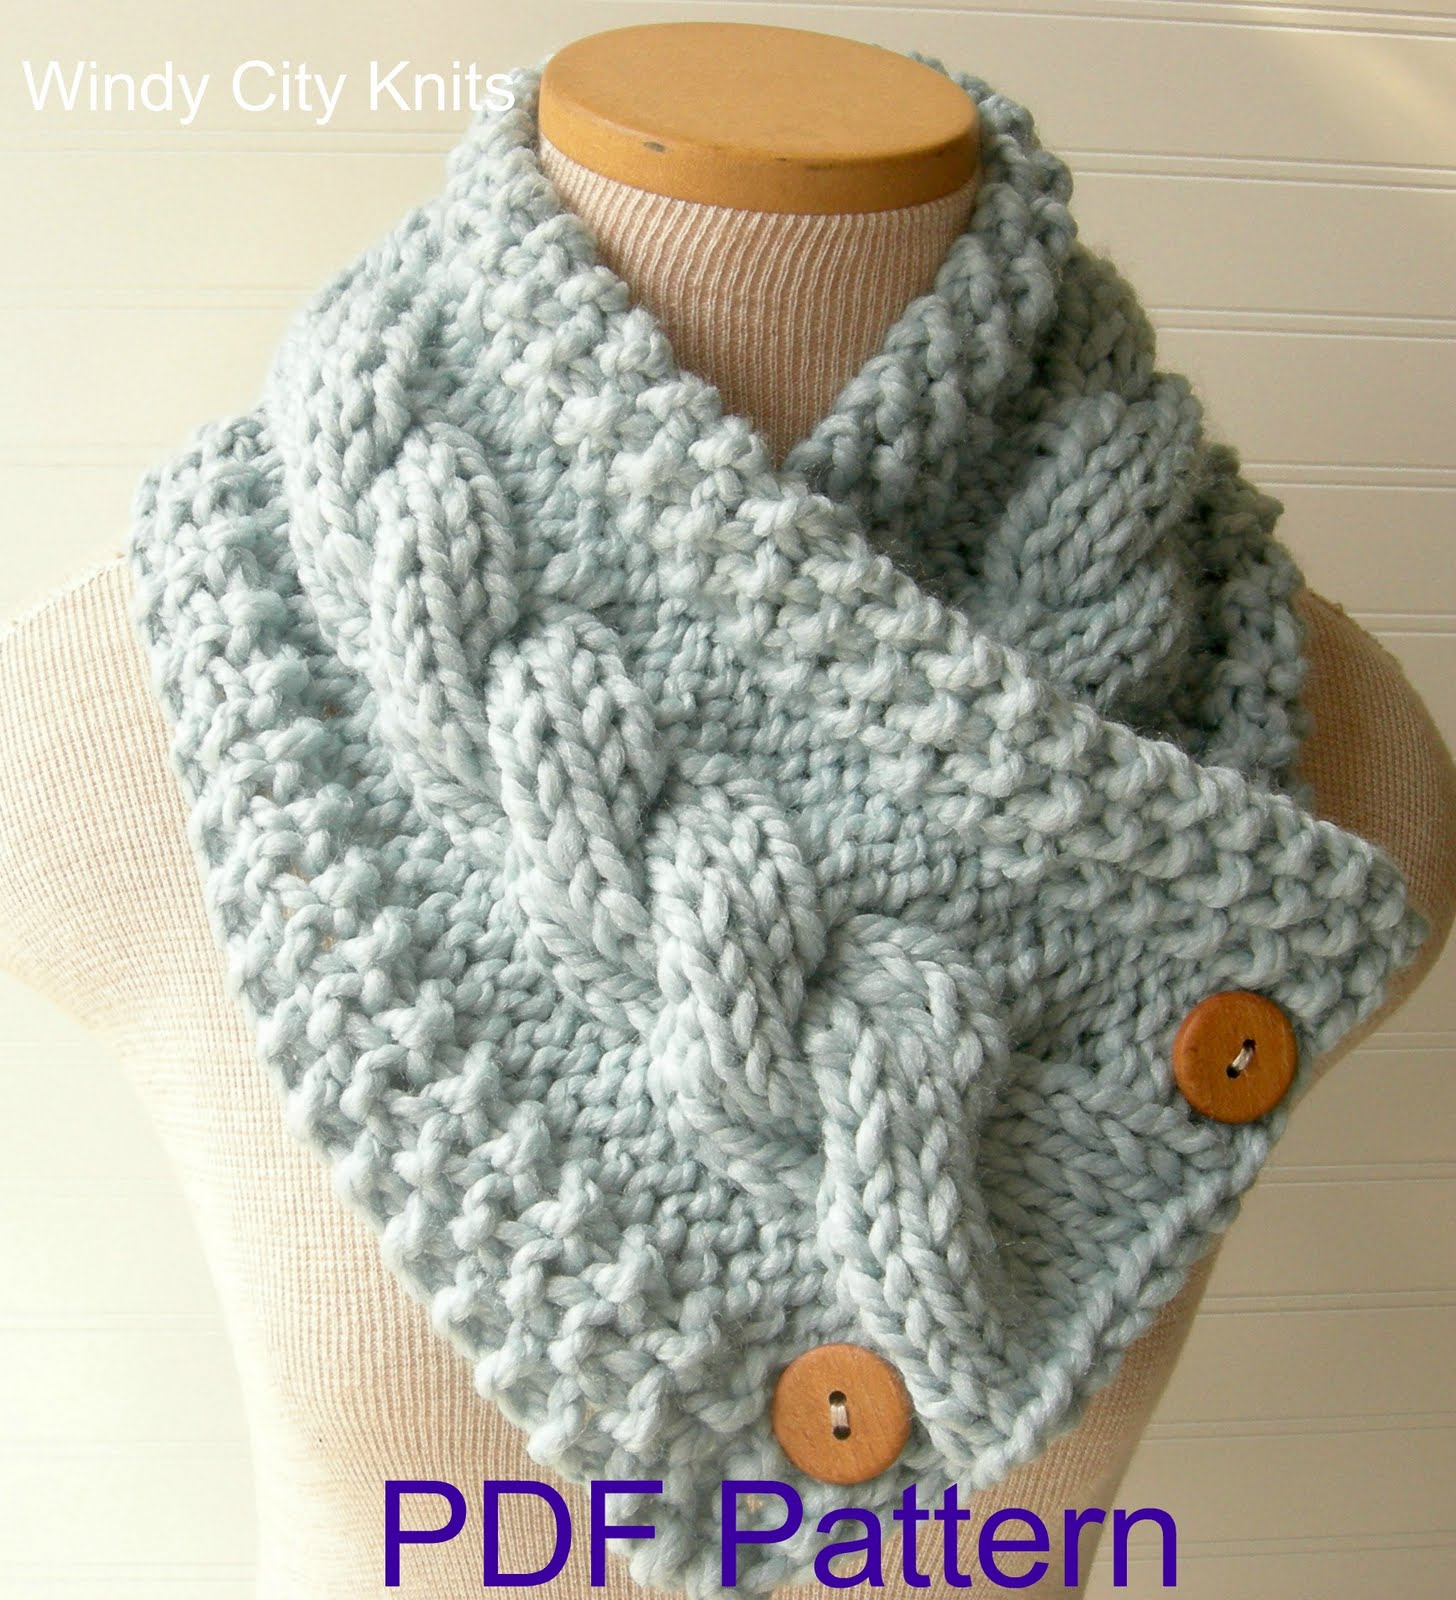 Knitted Cable Scarf Patterns Windycityknits Knit Cable Cowl Scarf Pattern Pdf